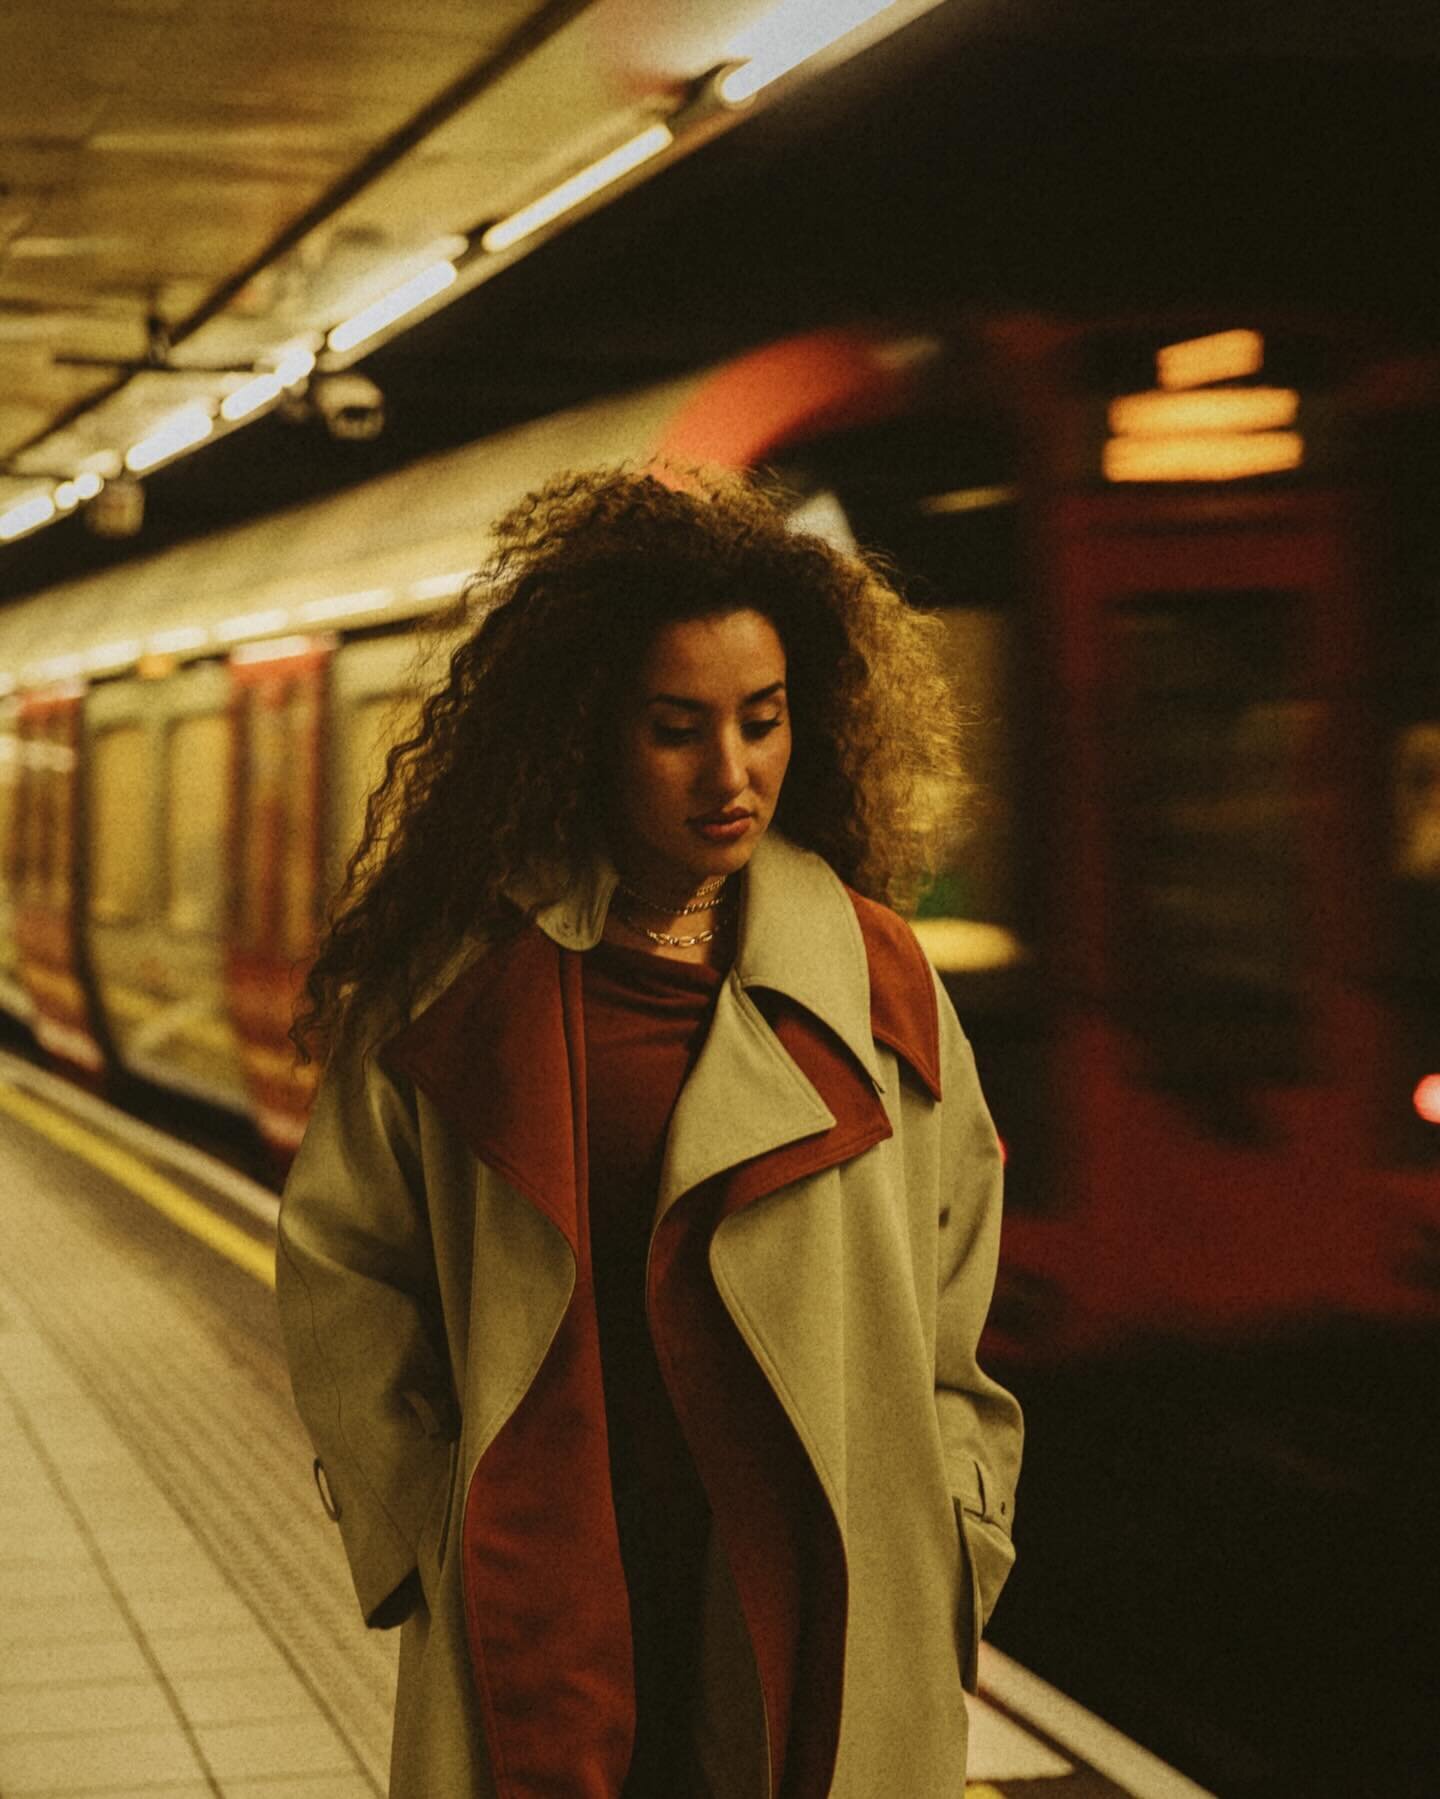 MARCHING THROUGH LONDON ✊

This is the story of @_avije_ and her sister travelling to London most Saturdays by train to join the global protests in London to stand with Iran. Looking out the train window, reflecting on the journey ahead, the journey 